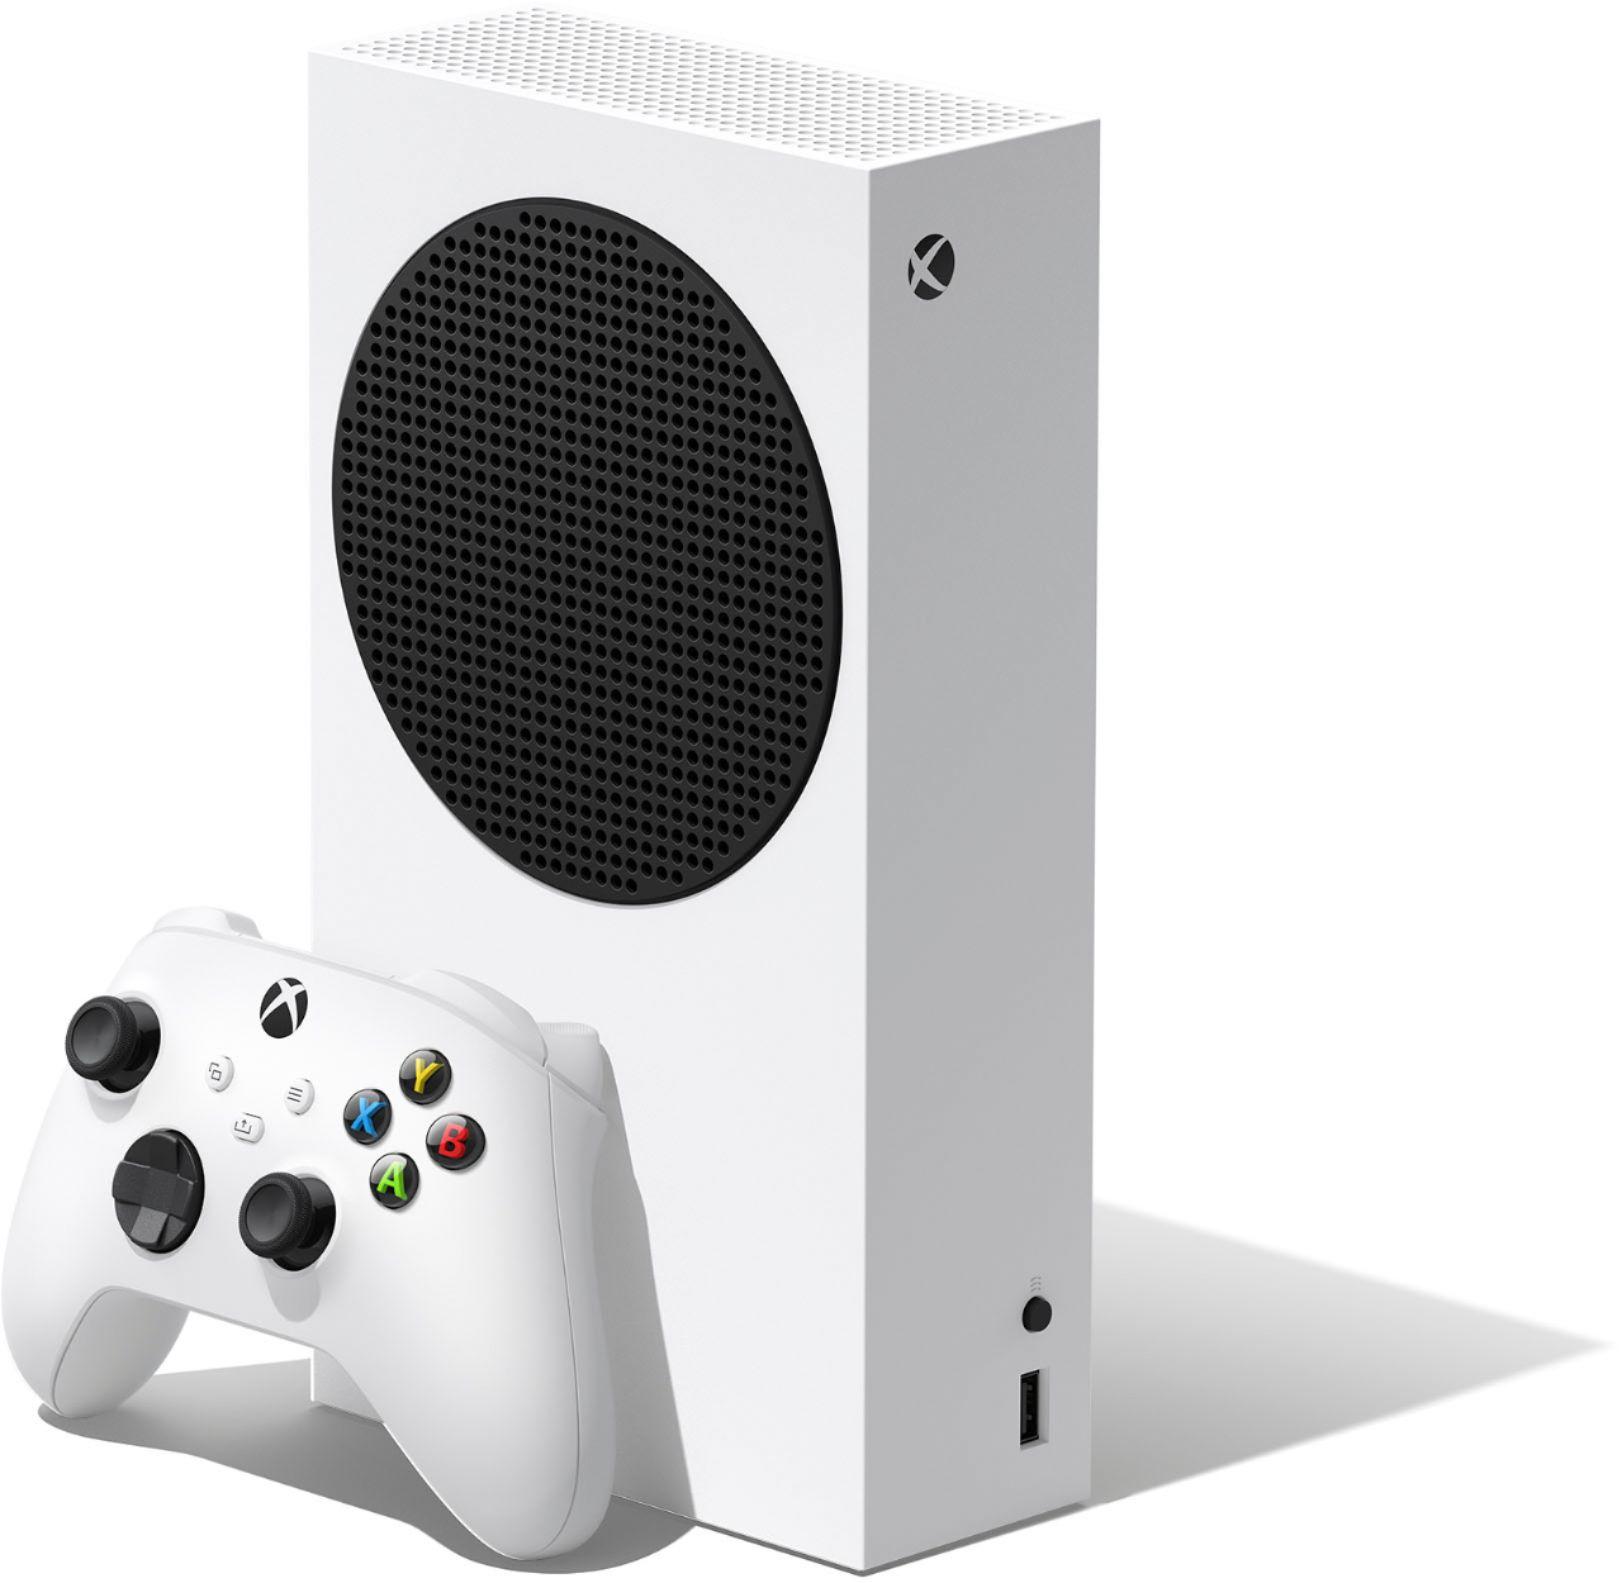 Microsoft Xbox Series S 512GB Console System Refurbished for $199.99 Shipped